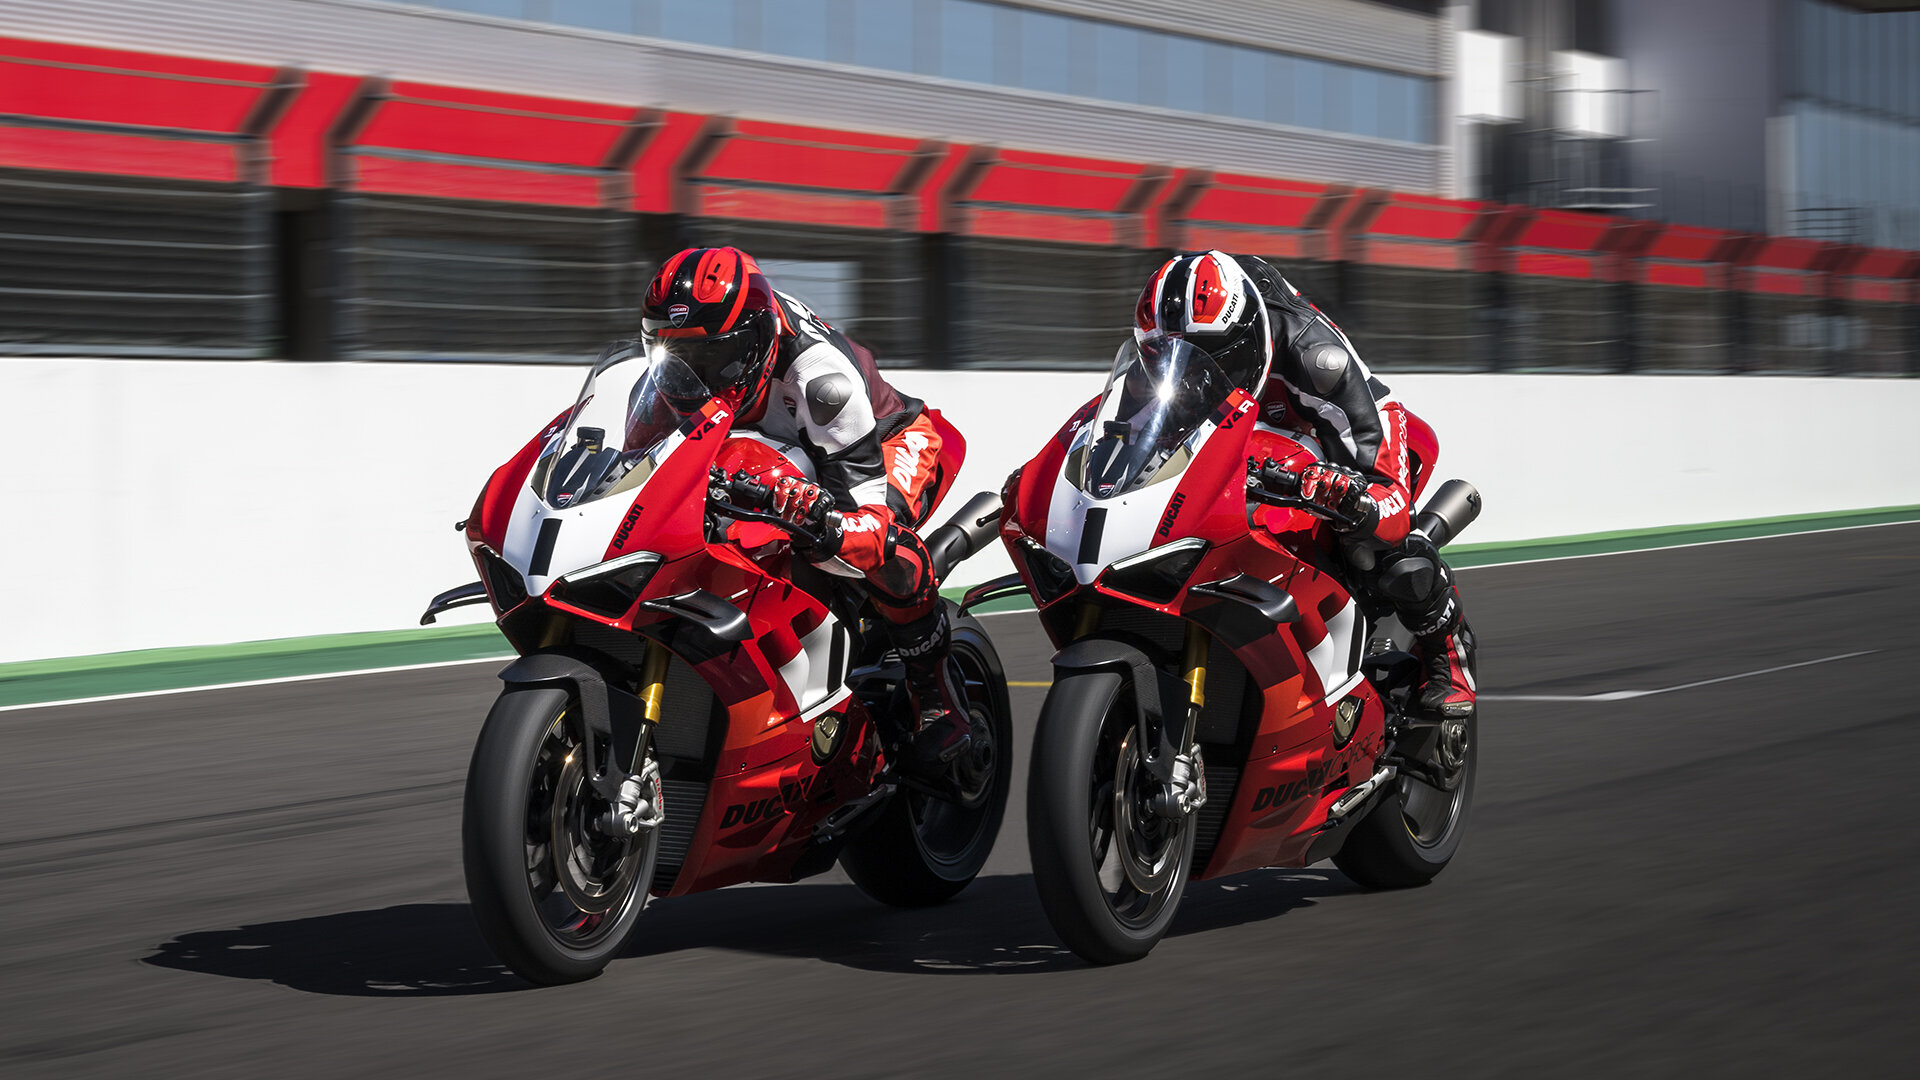 Ducati-Panigale-V4R-MY23-overview-gallery-02-1920x1080.jpg